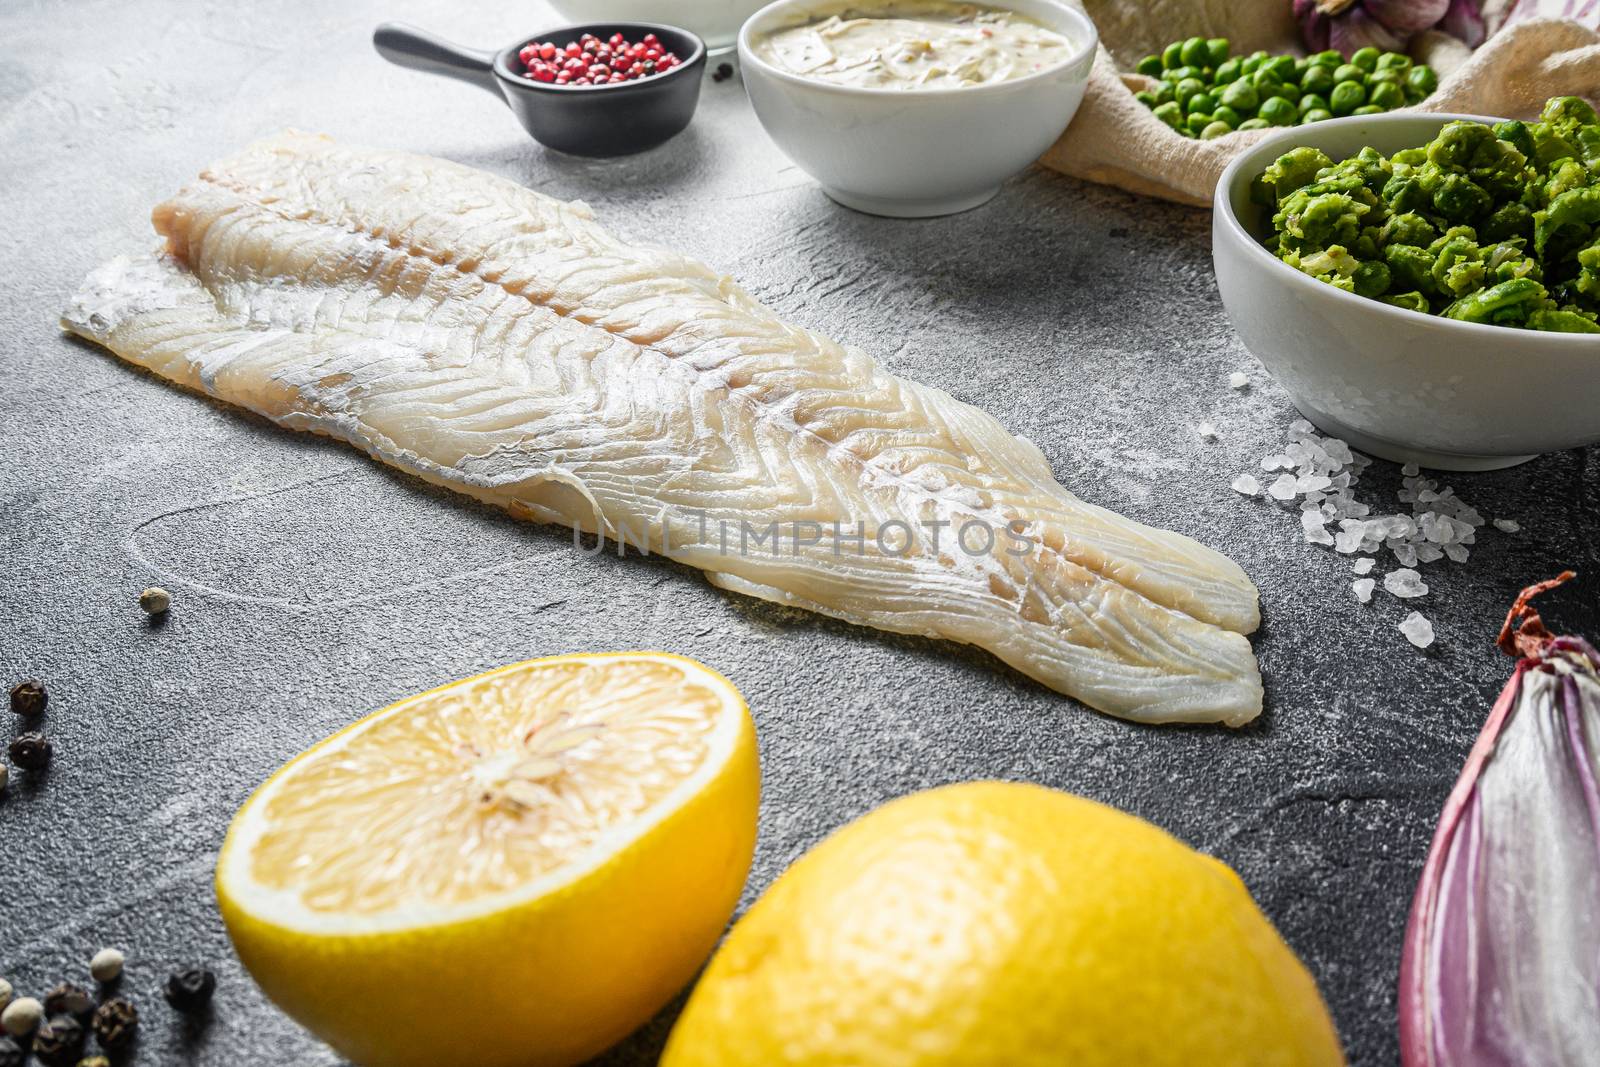 Cod fish for english traditional Fish and chips ingredients beer batter, potatoe, tartar sauce, minty mushy peas, lemon , shallot, mint, garlic, salt, peppercorns, cod fish side view grey concrete background new wide angel